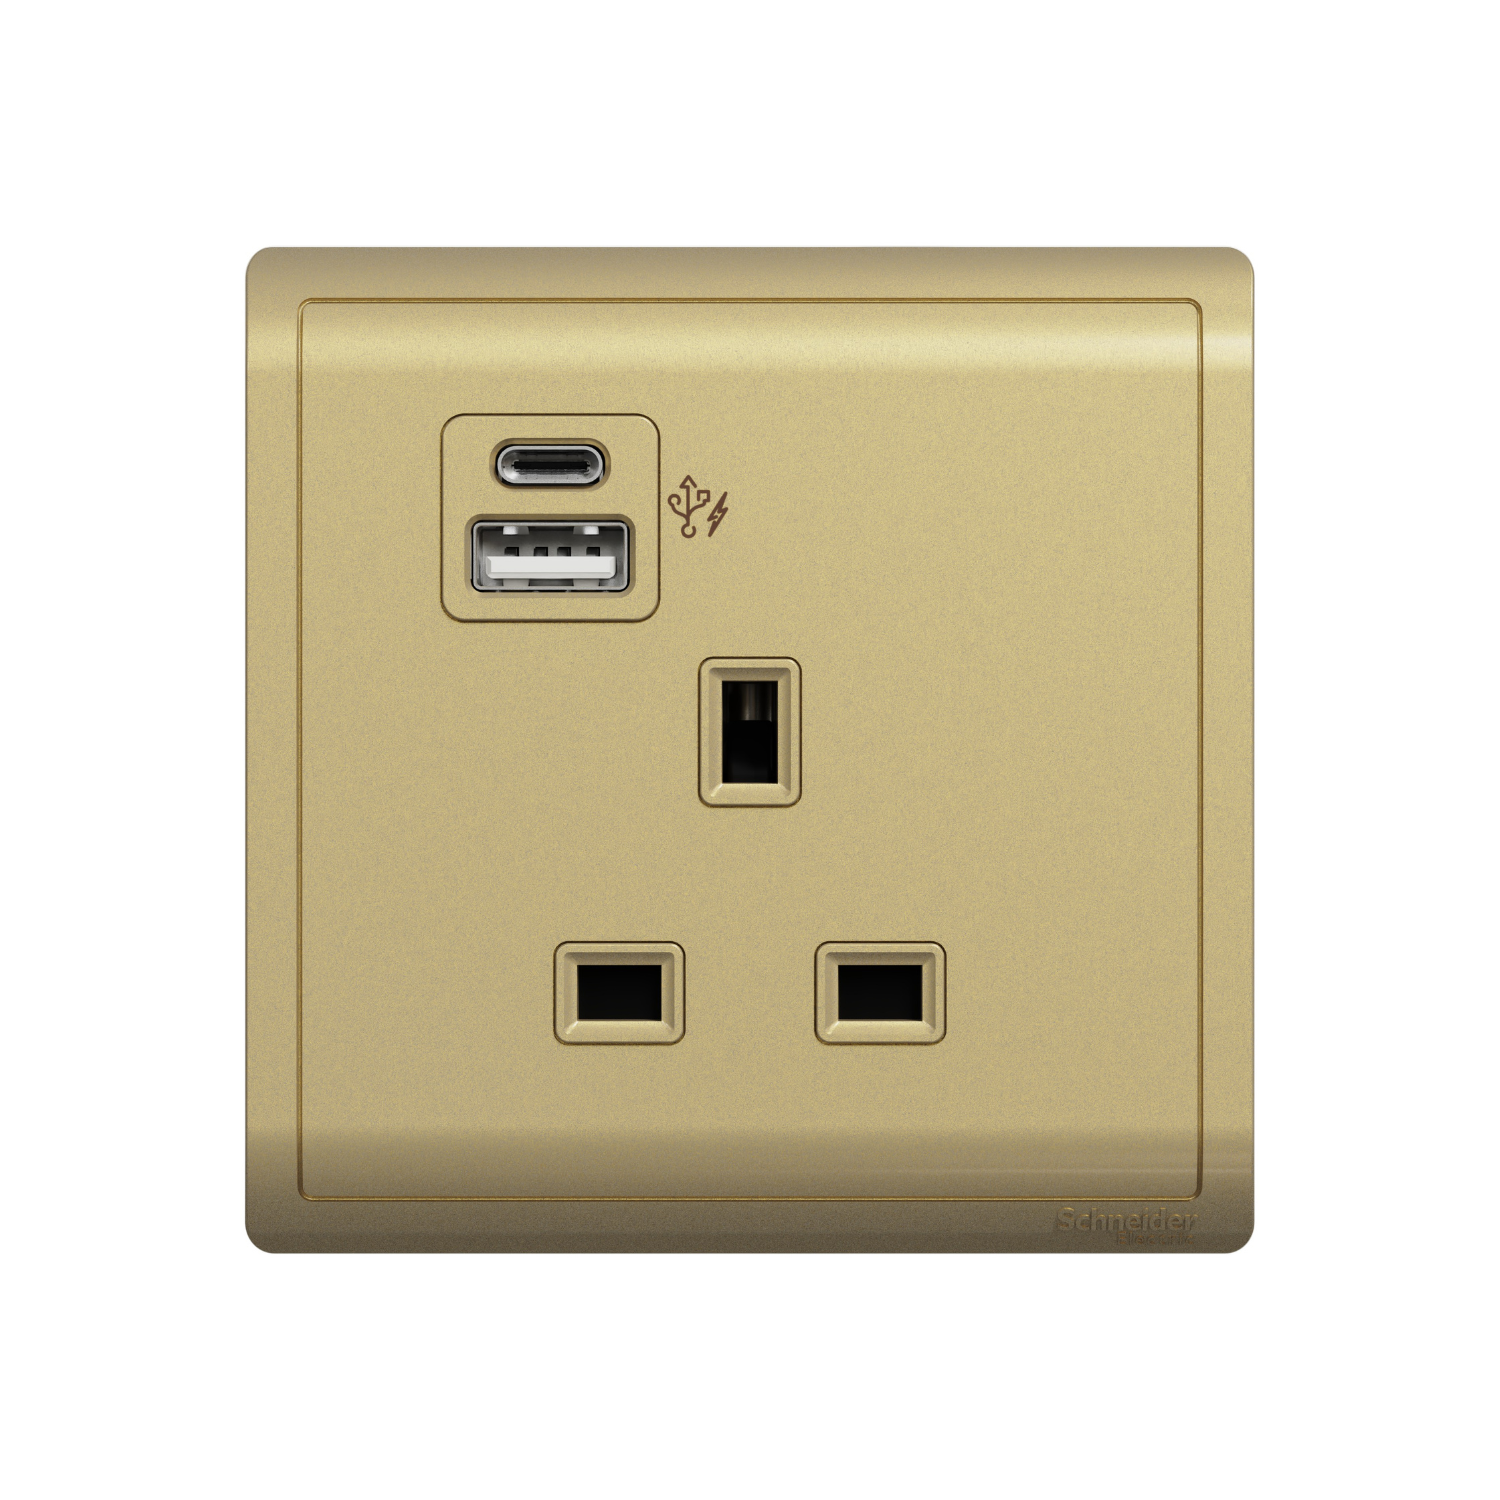 PIENO 13A 1 Gang Socket with 2 Gang USB Fast Charger Socket Type A+C, Wine Gold